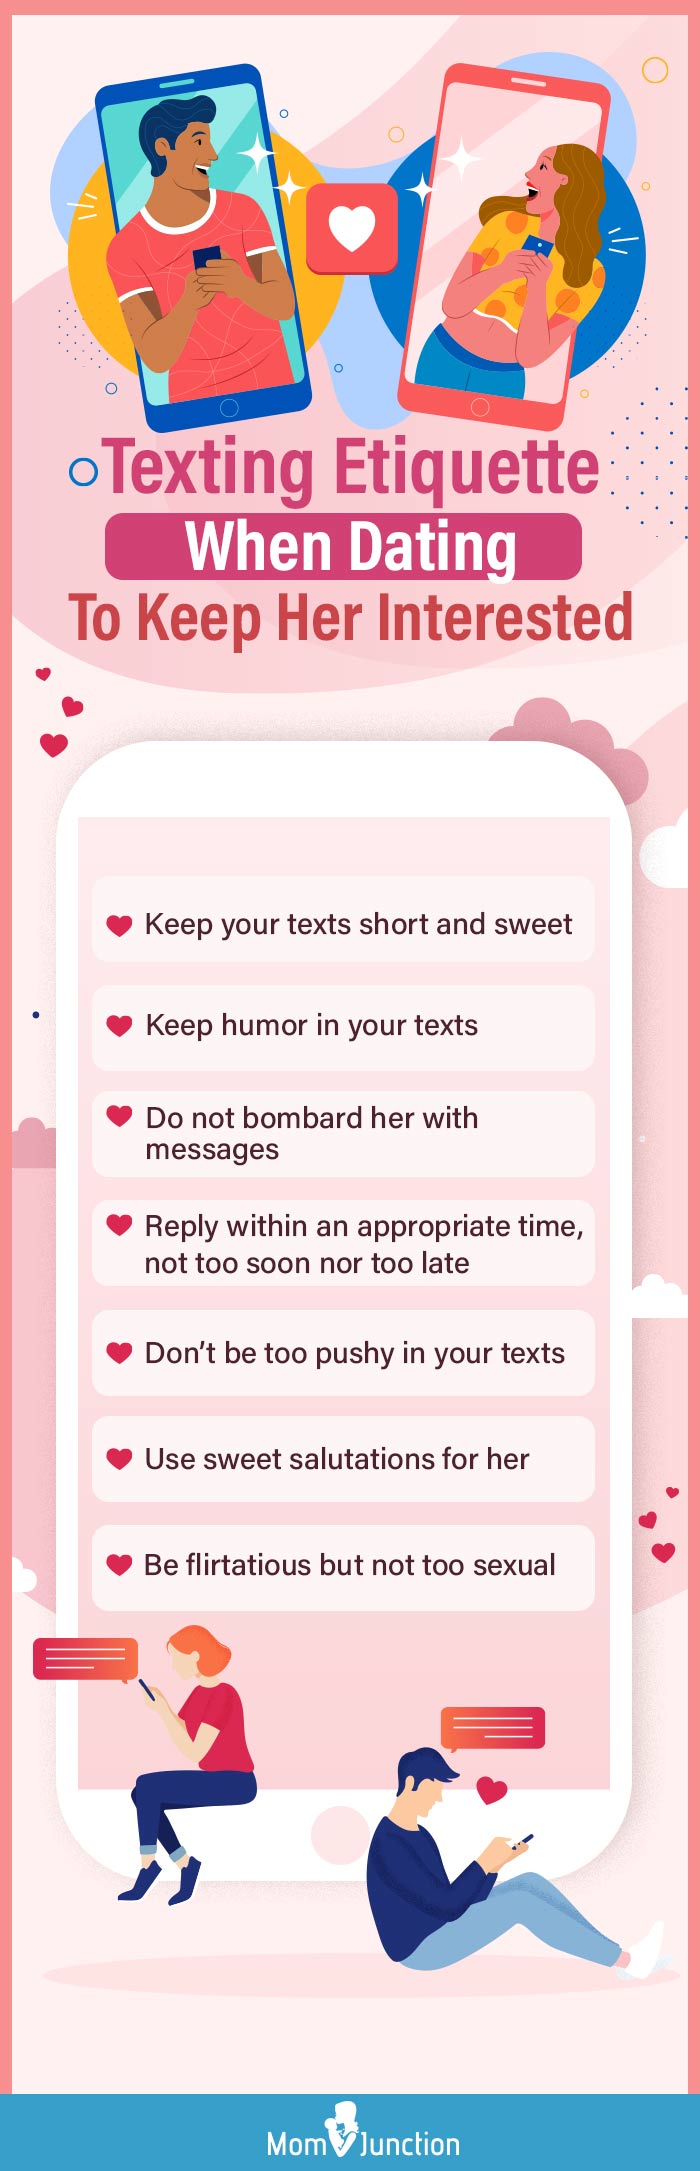 texting etiquettes when dating to keep her interested (infographic)